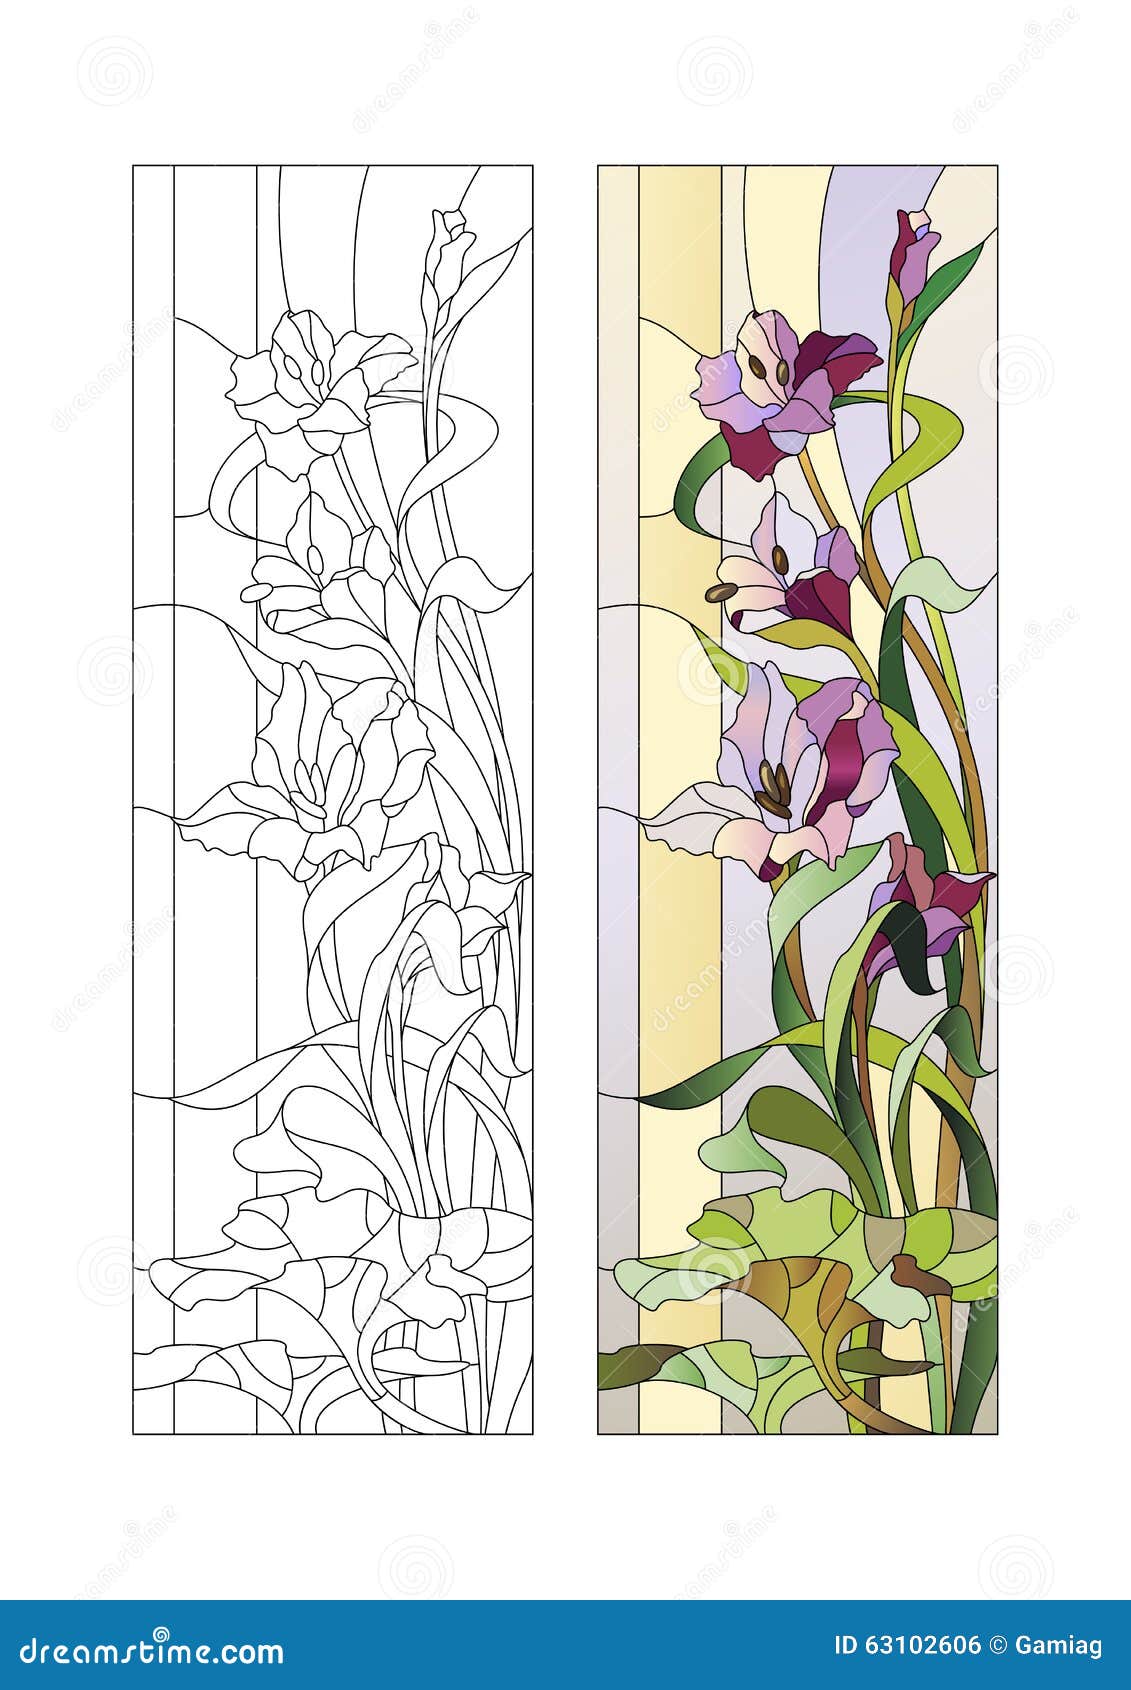 stained glass pattern with gladioli